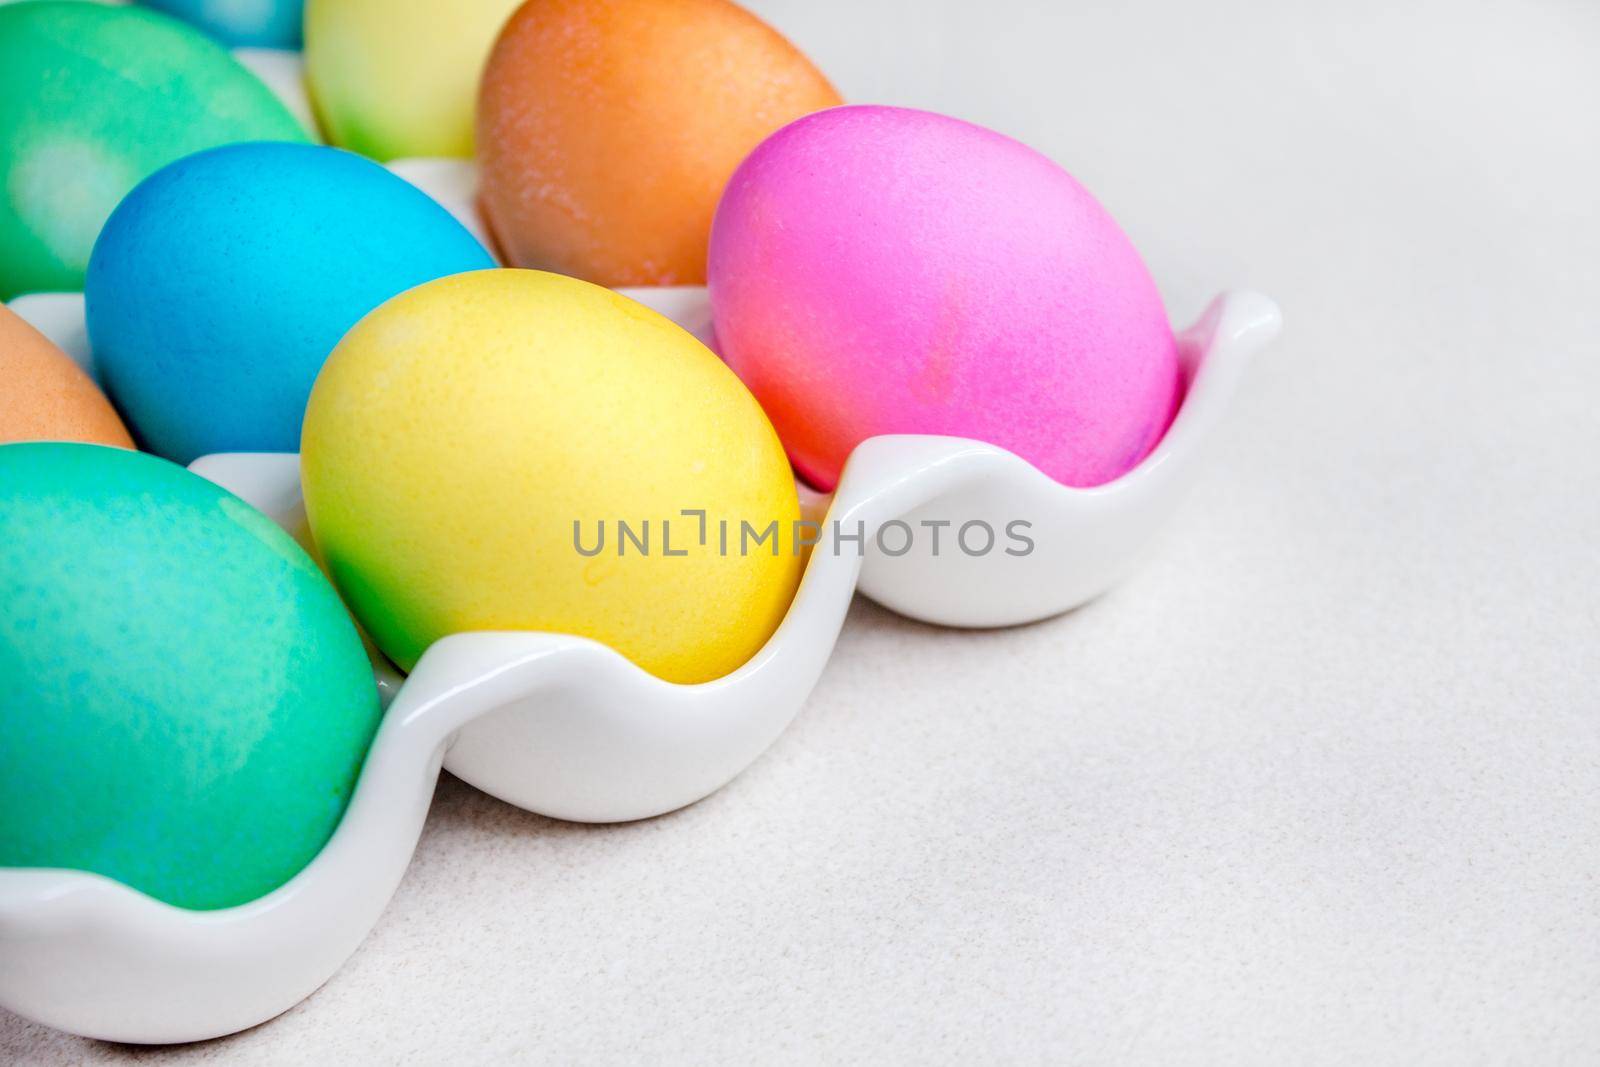 Pastel Easter eggs lying on white table. Traditional decoration